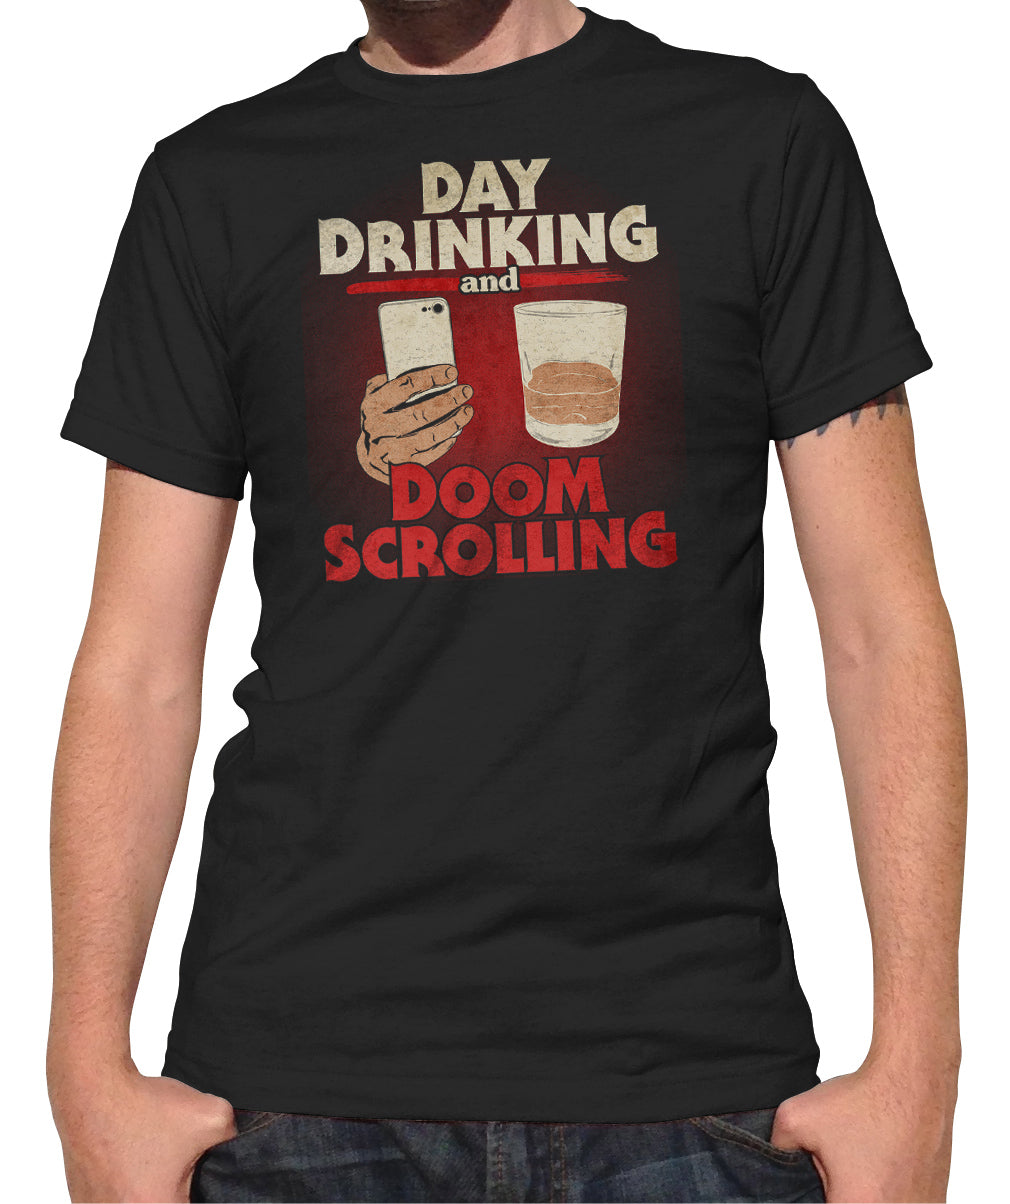 Men's Day Drinking and Doom Scrolling T-Shirt